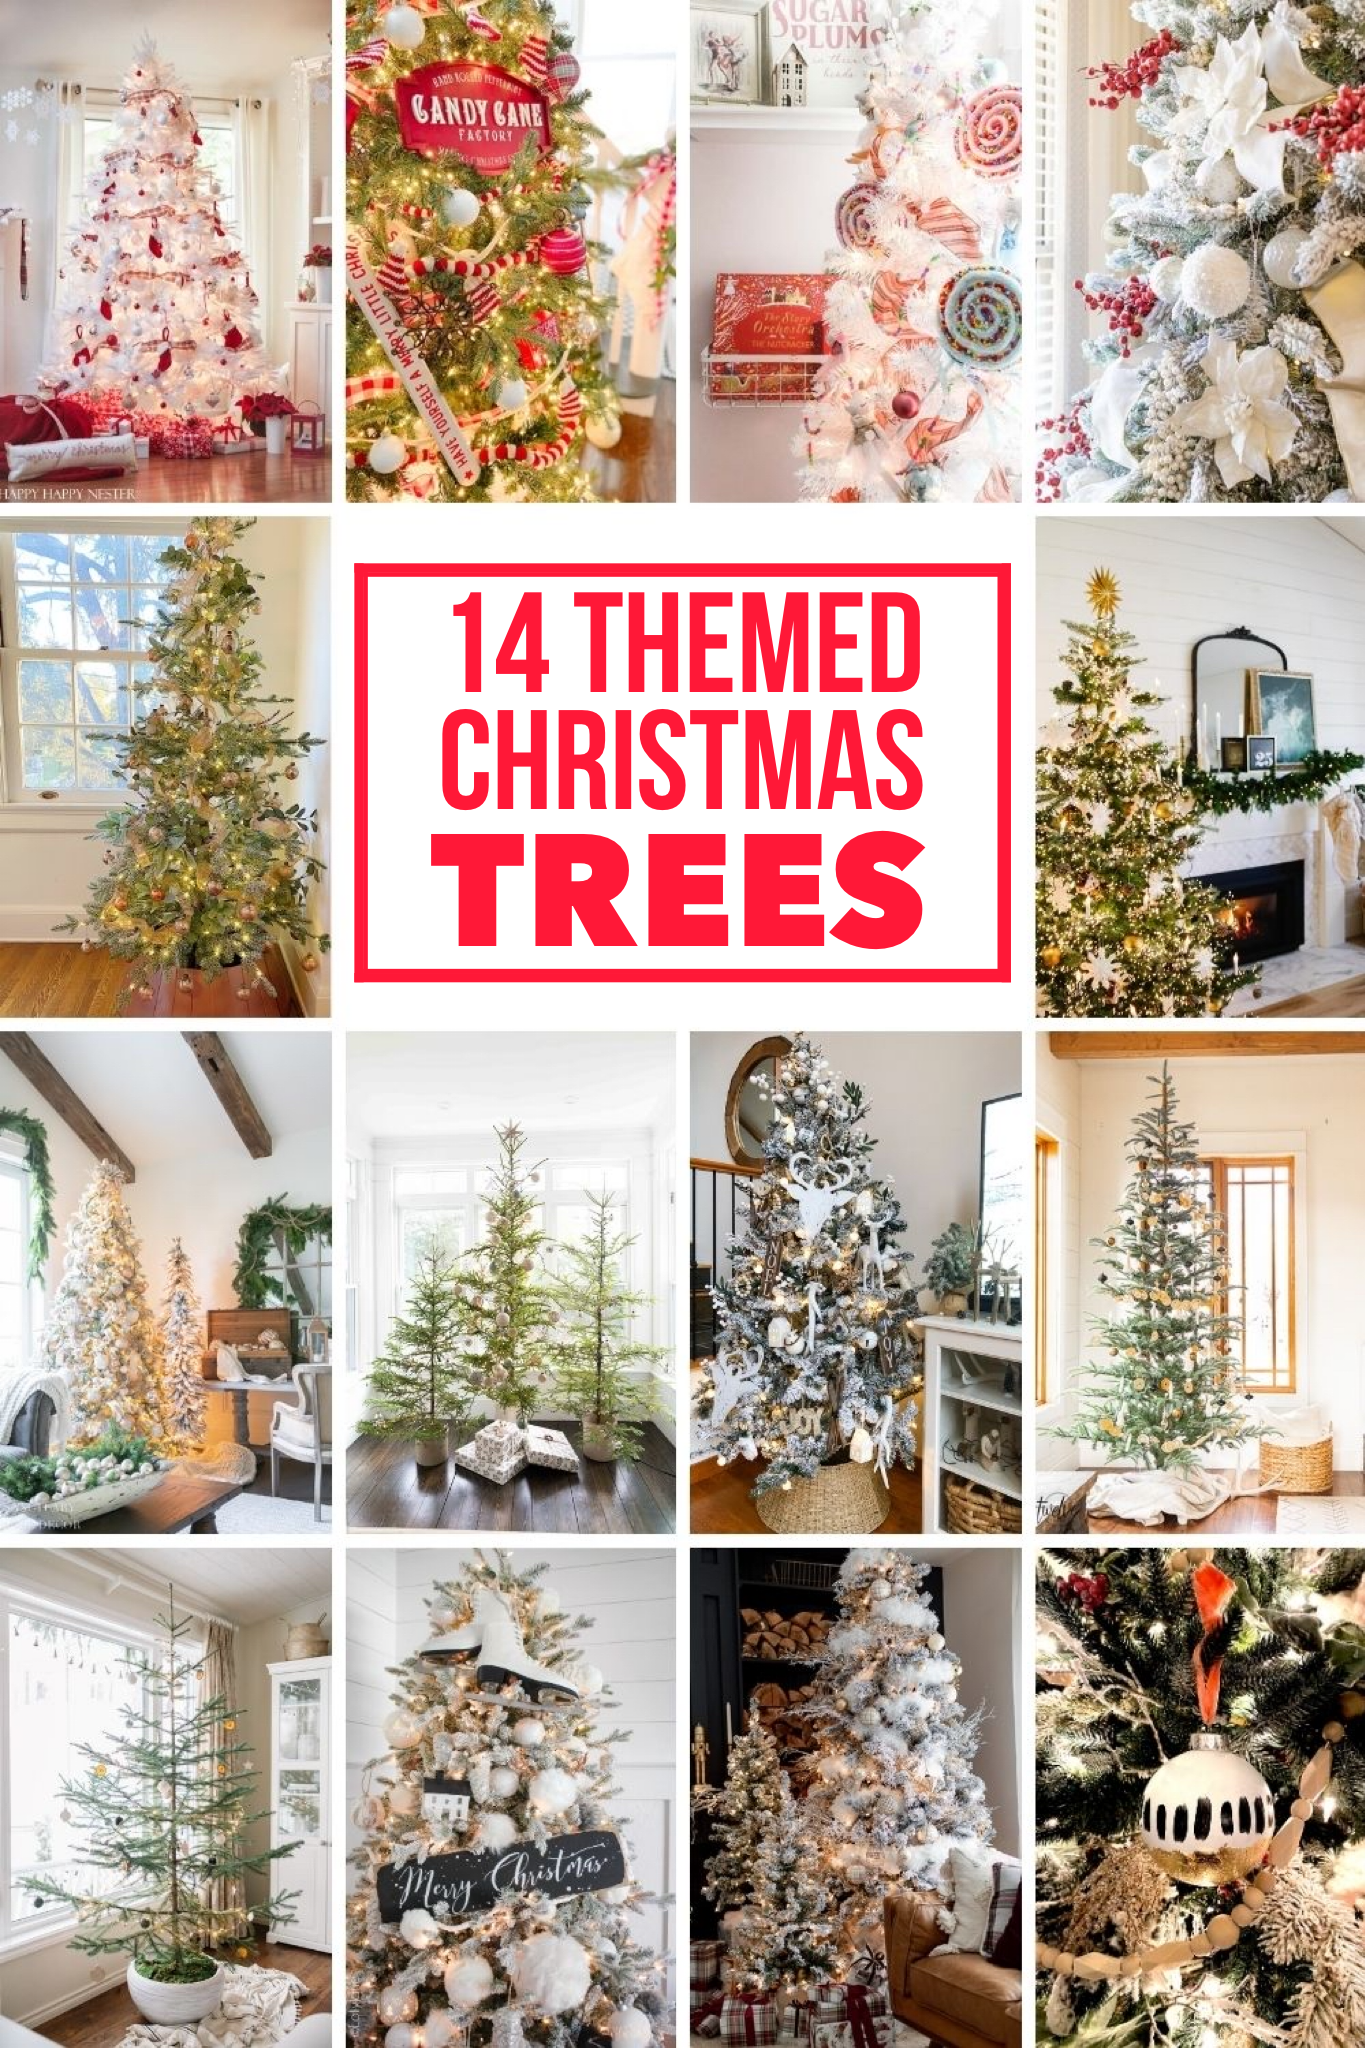 my scandinavian home: 21 Beautiful Scandinavian Christmas Tree ideas - From  Traditional to all out Crazy!